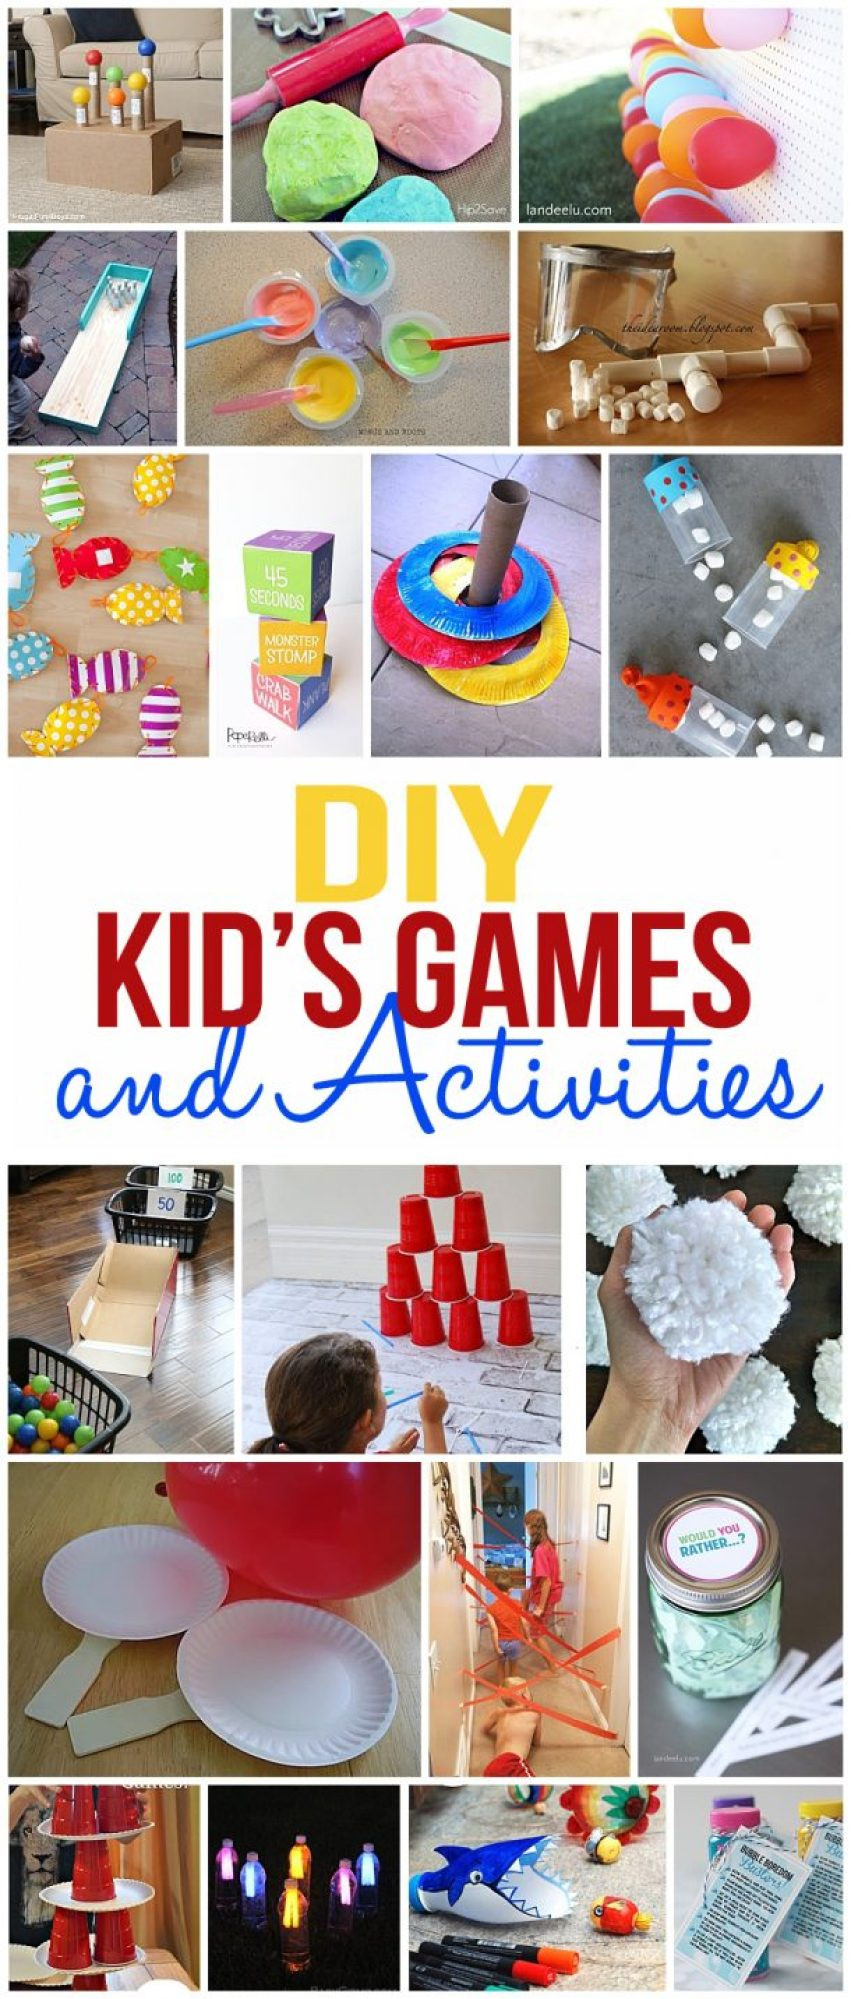 Homemade Projects For Kids
 DIY Kids Games and Activities for Indoors or Outdoors